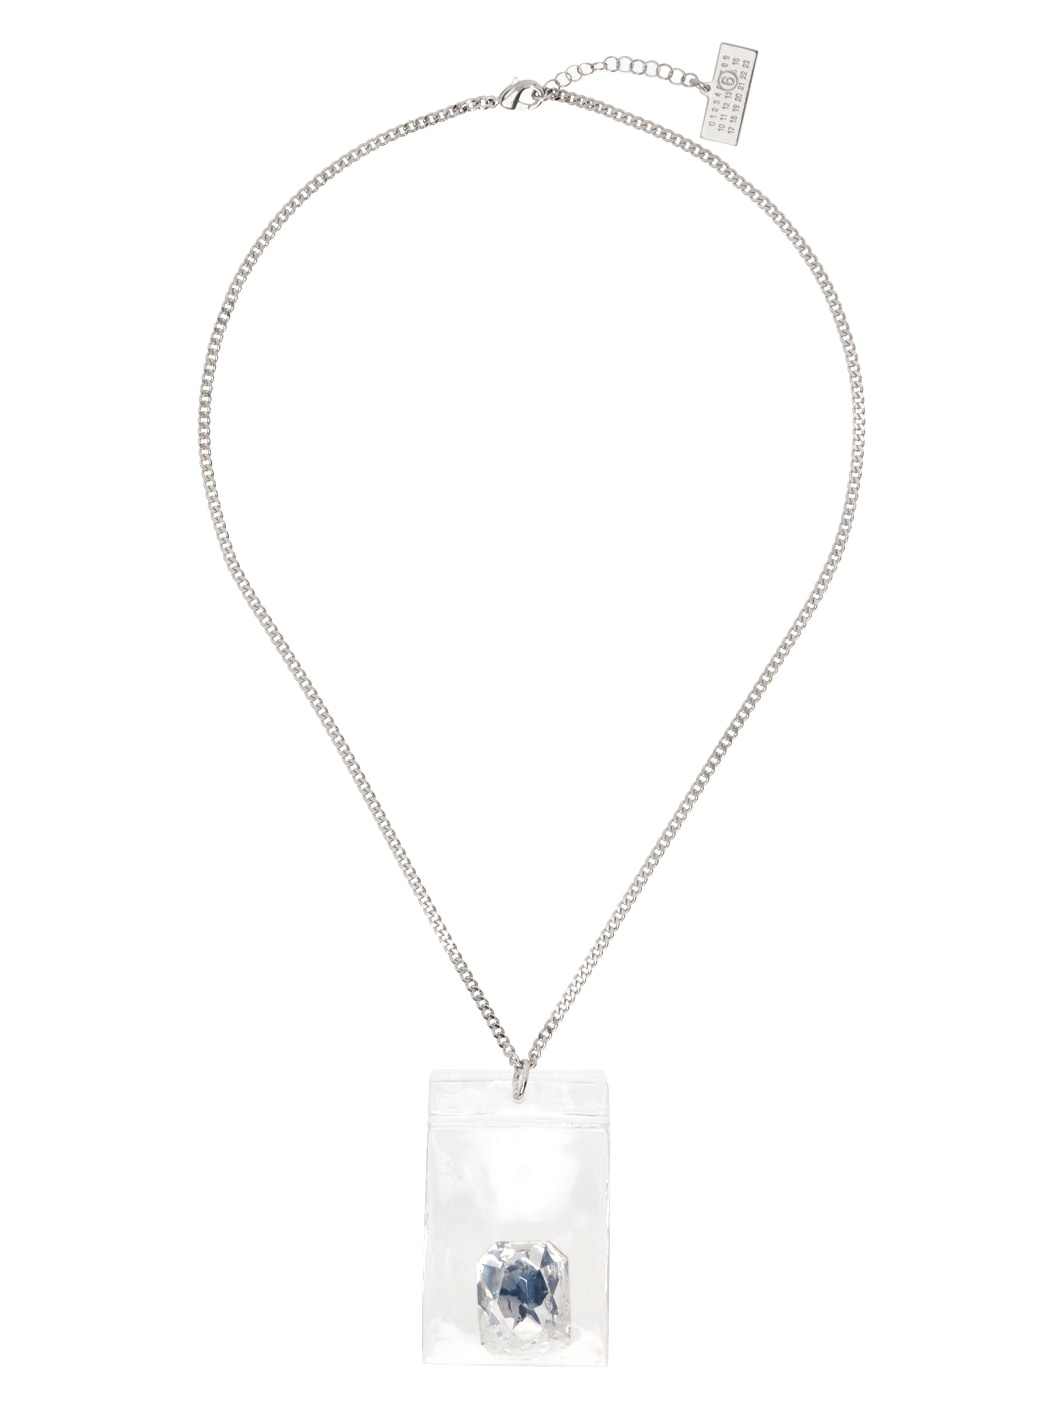 Silver Stone In Plastic Bag Necklace - 1